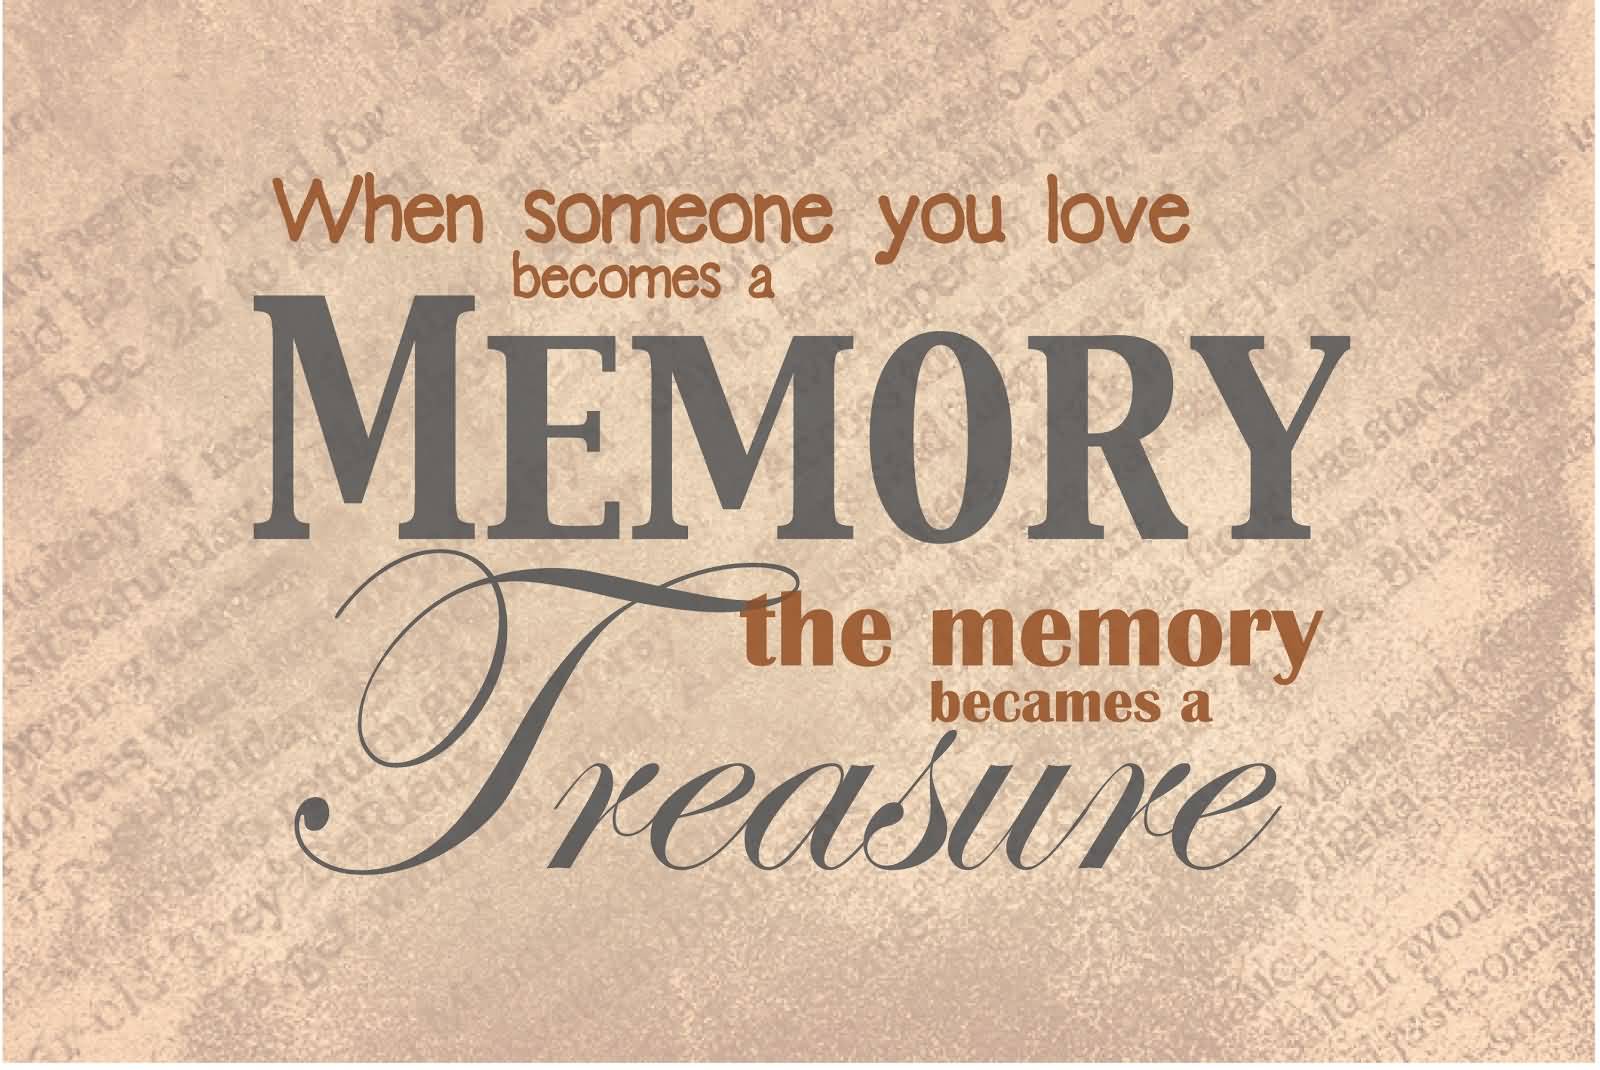 When someone you love becomes a memory the memory becomes a treasure